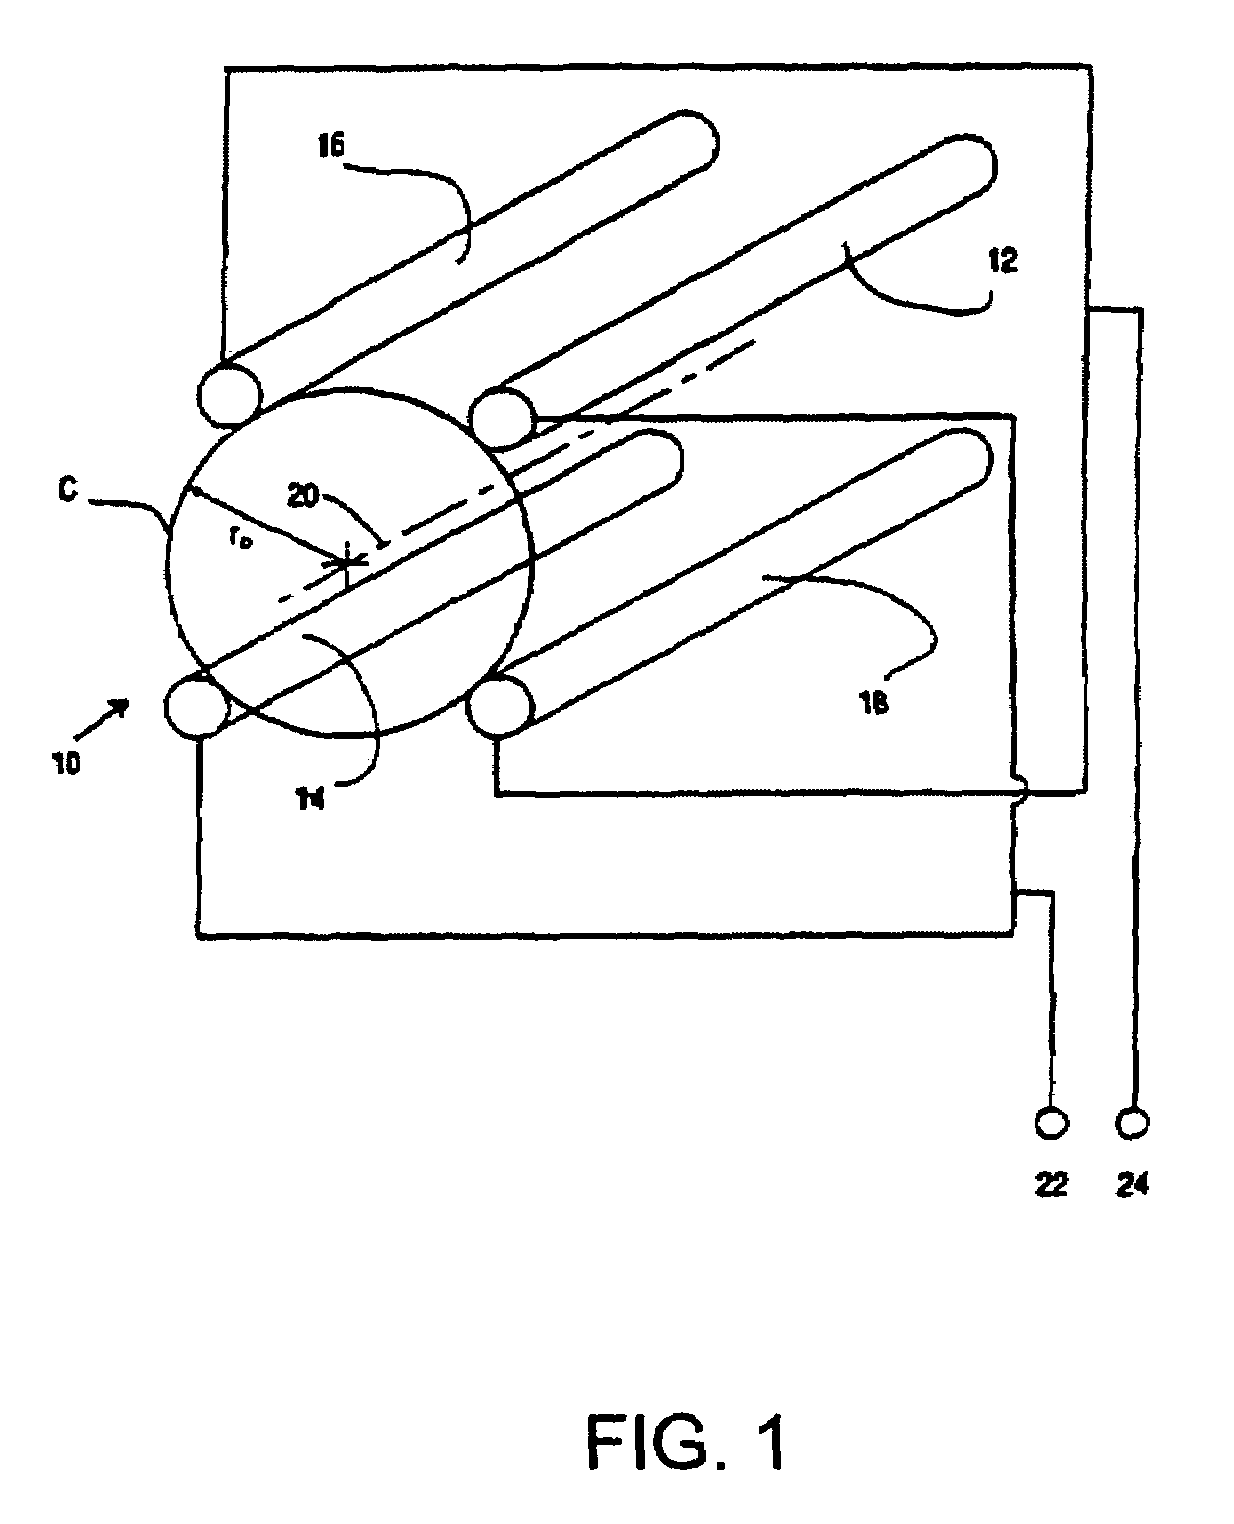 Method and apparatus for providing two-dimensional substantially quadrupole fields having selected hexapole components